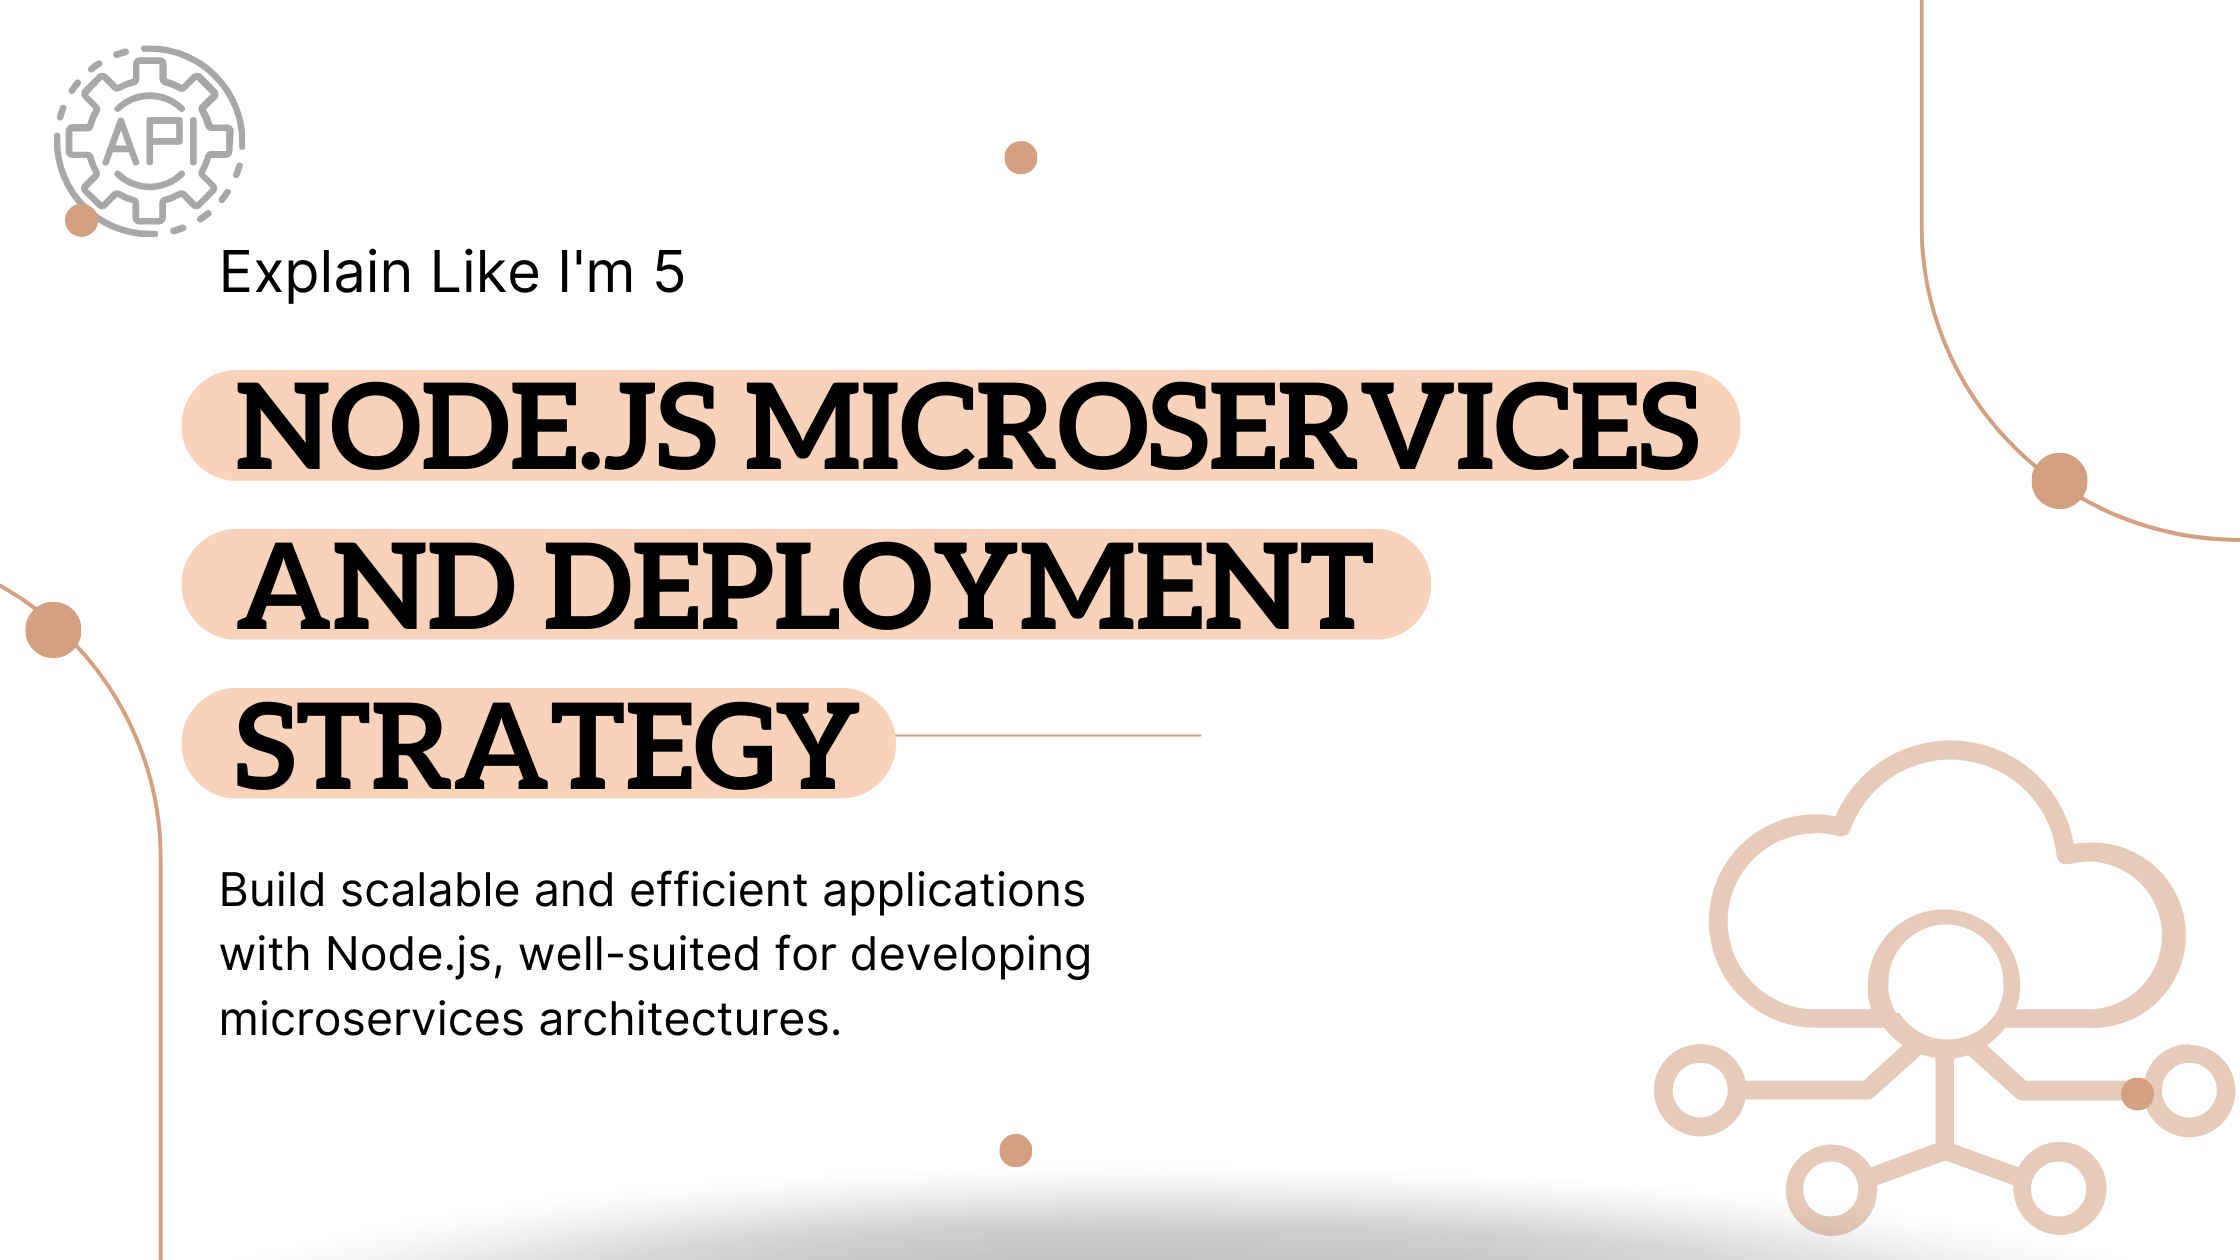 Nodejs-Microservices-and-Deployment-Strategy